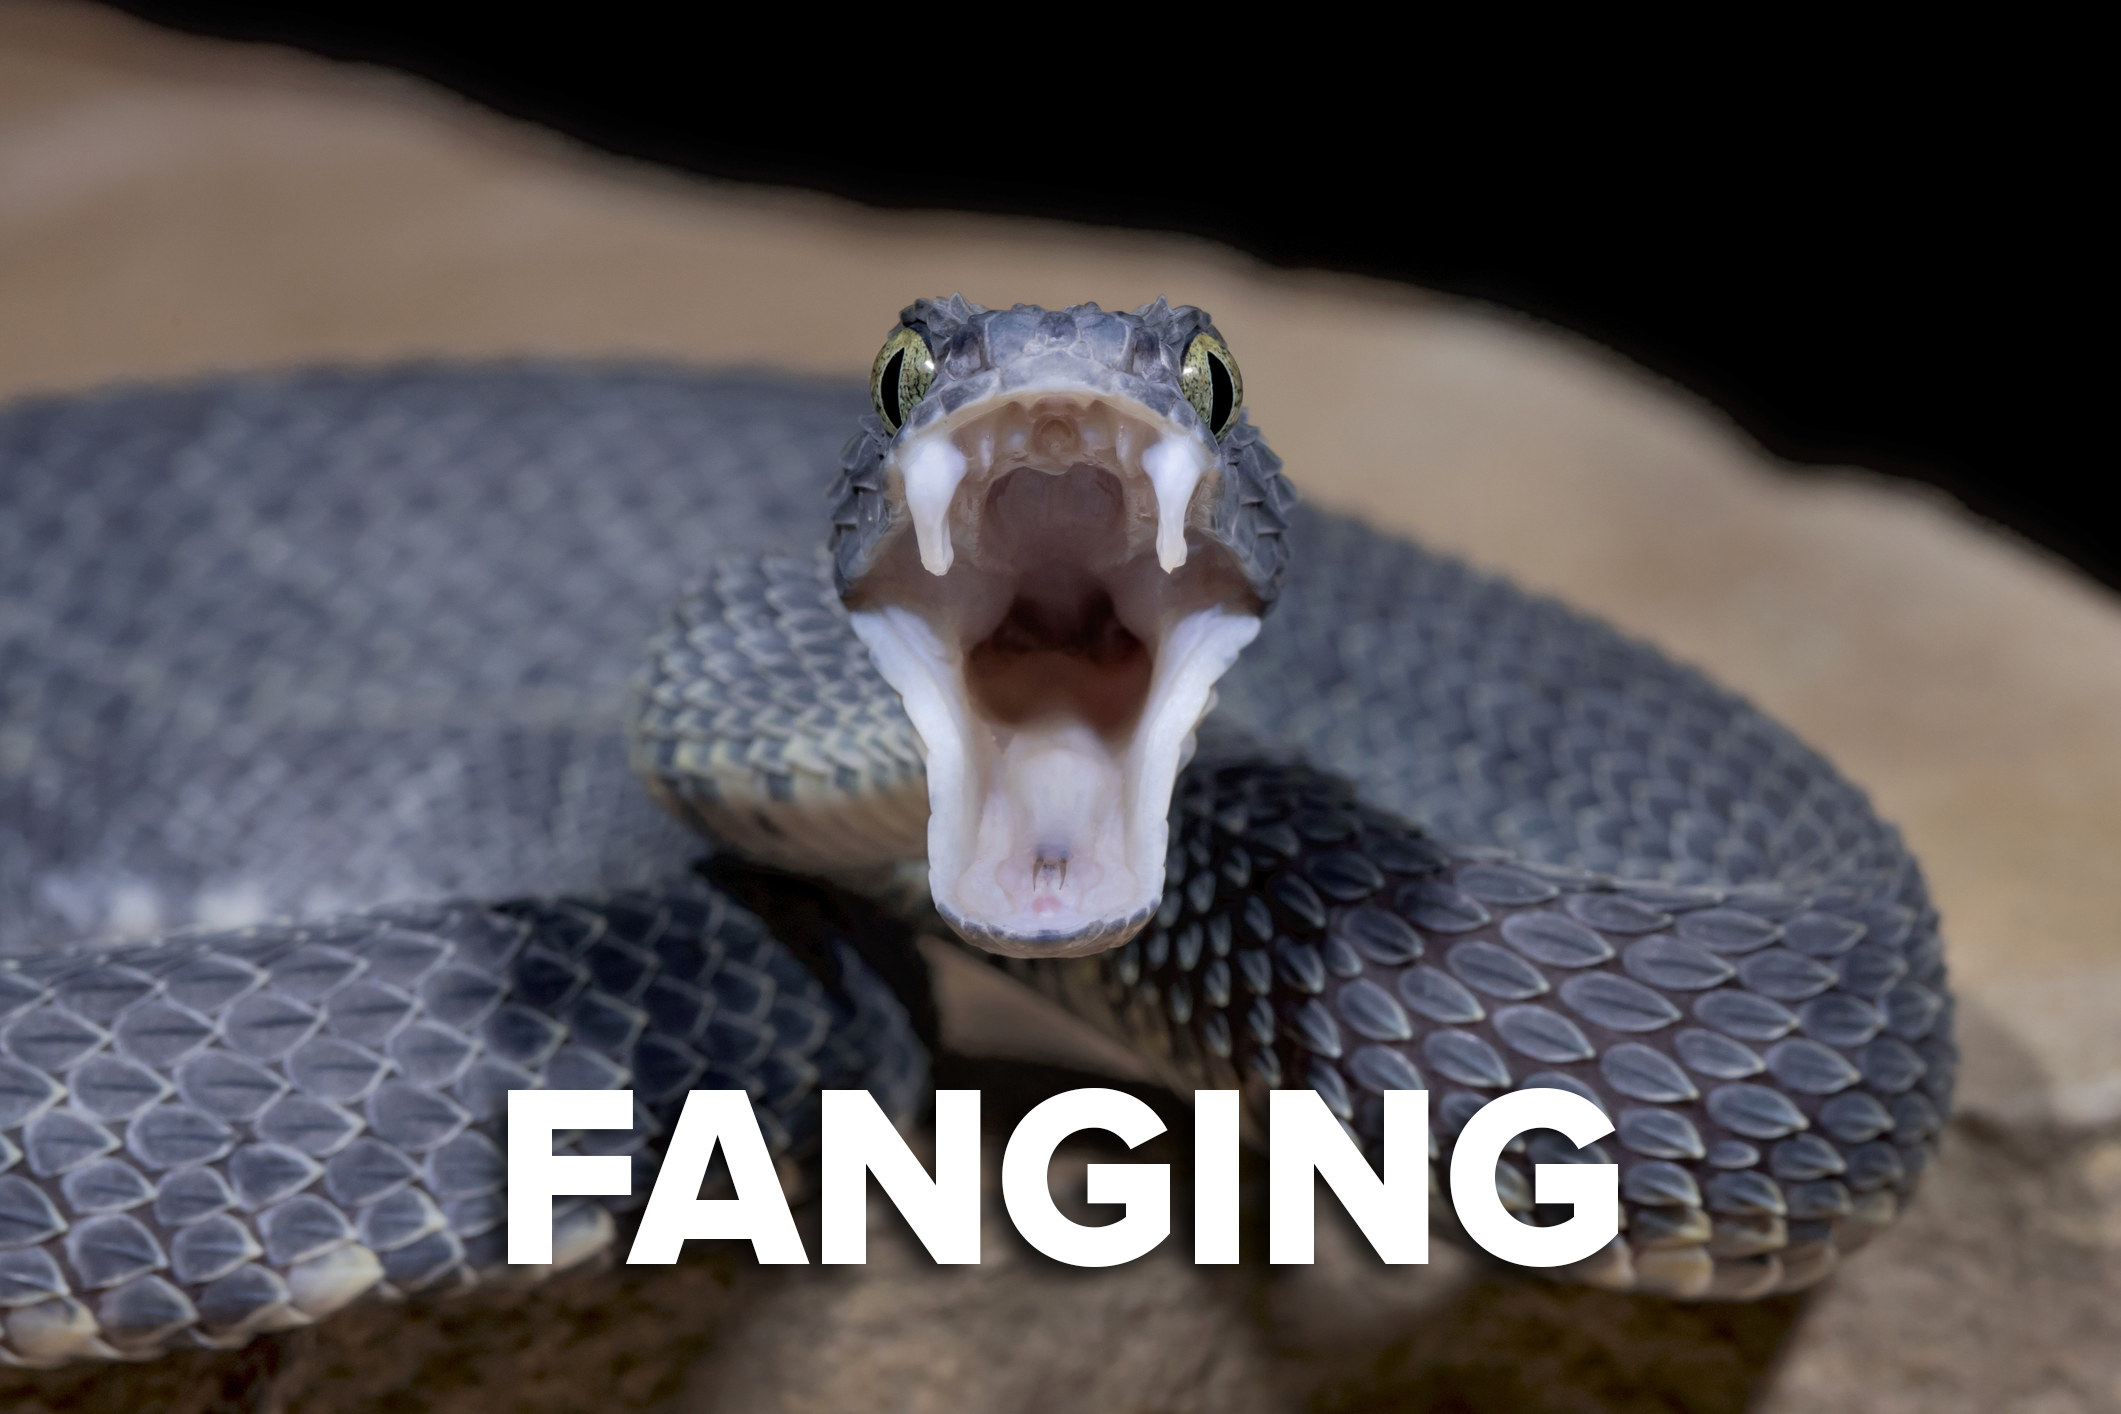 A snake hissing, showing its fangs